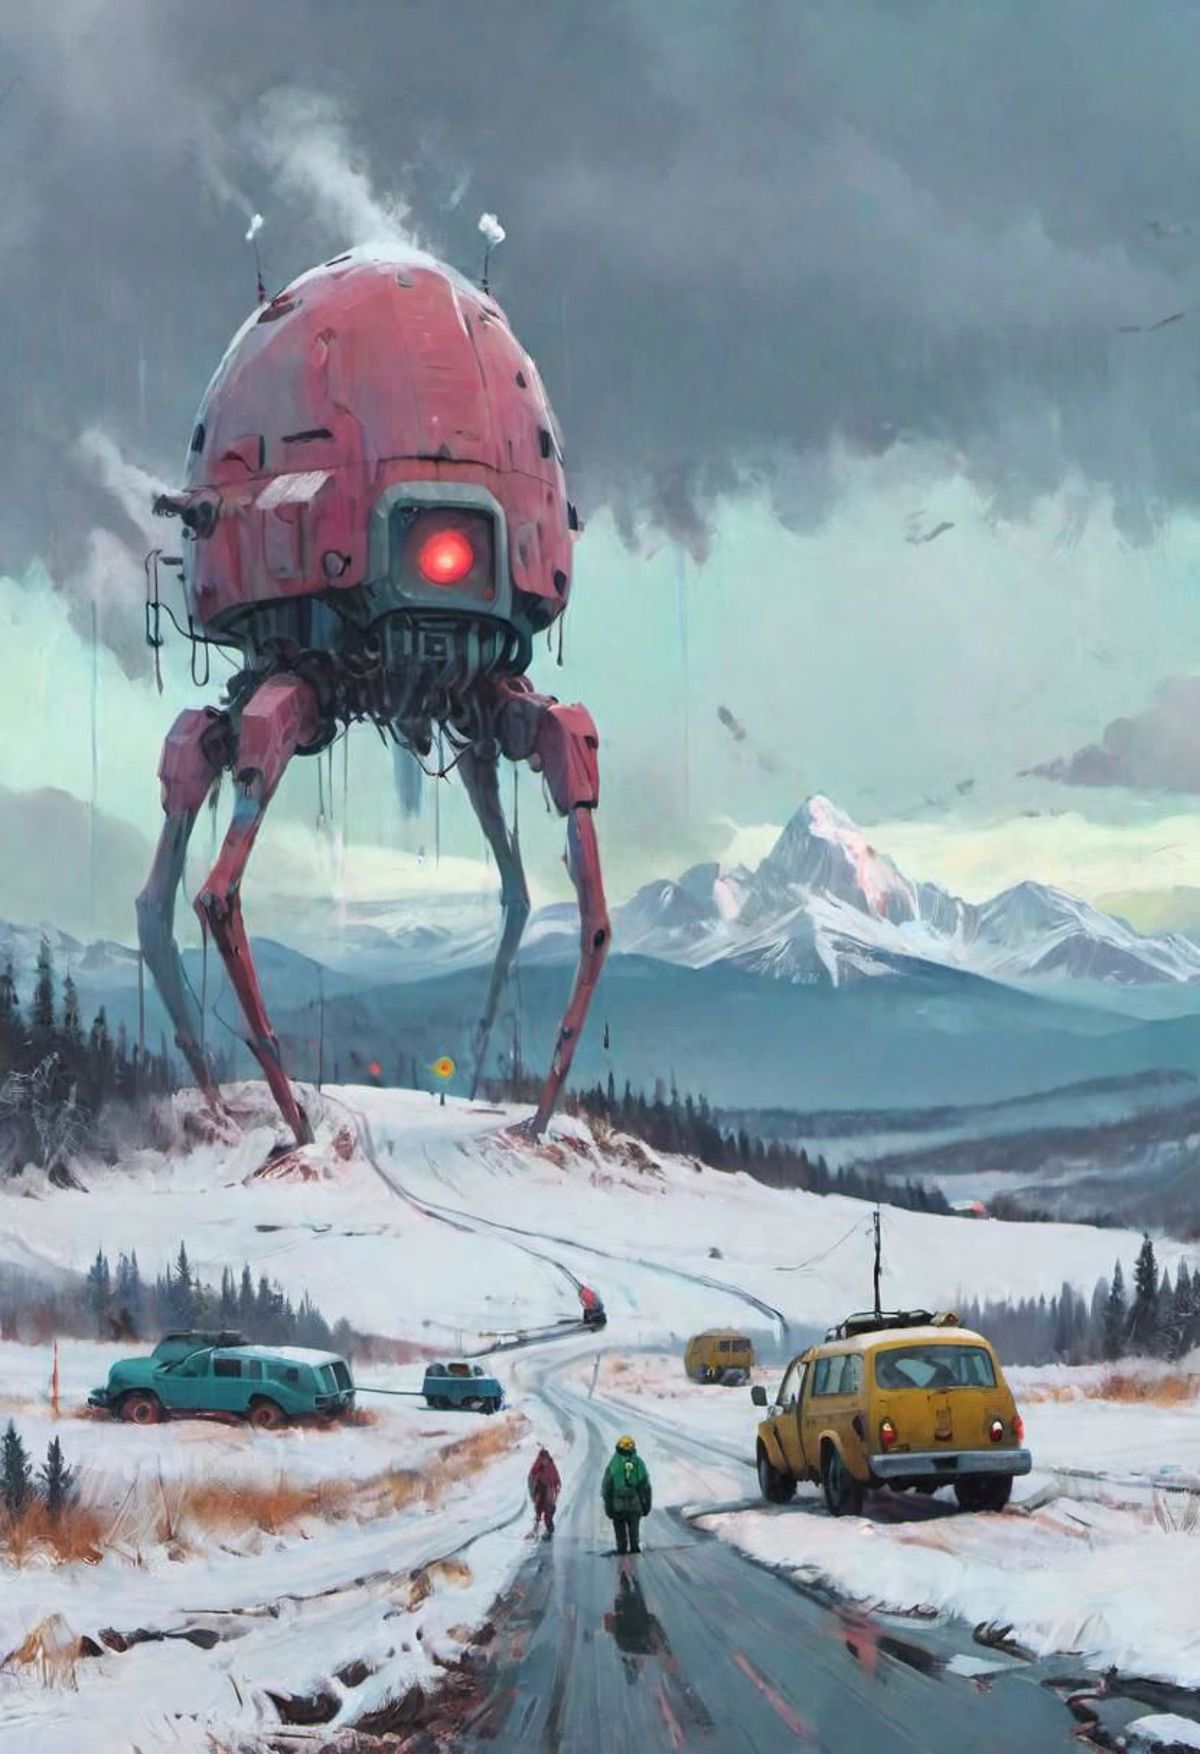 A snowy scene with a large pink robot and cars driving down the road.